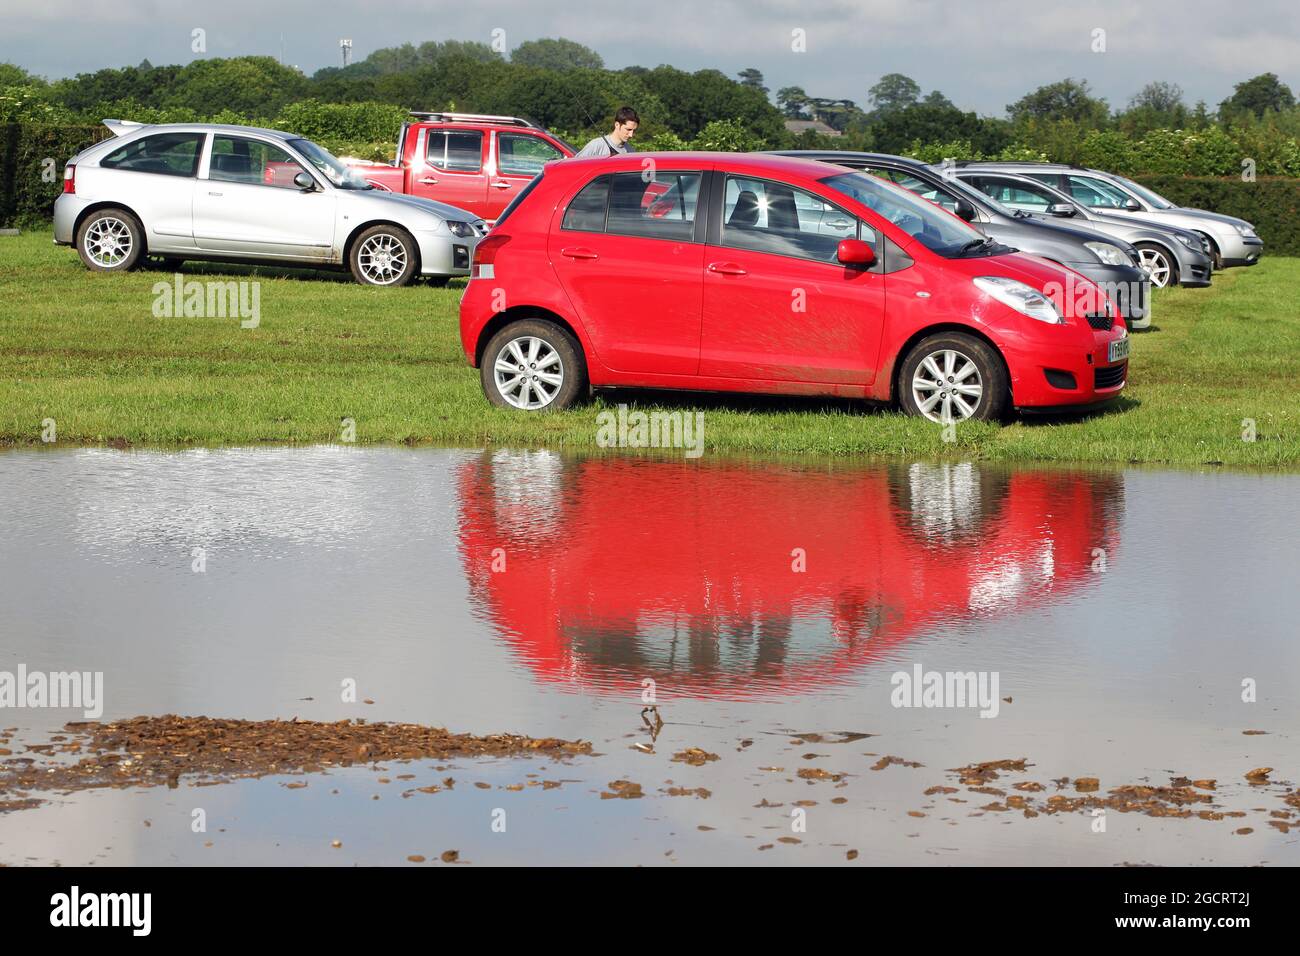 Wet and muddy car parks and camp sites at the circuit. British Grand Prix, Friday 6th July 2012. Silverstone, England. Stock Photo